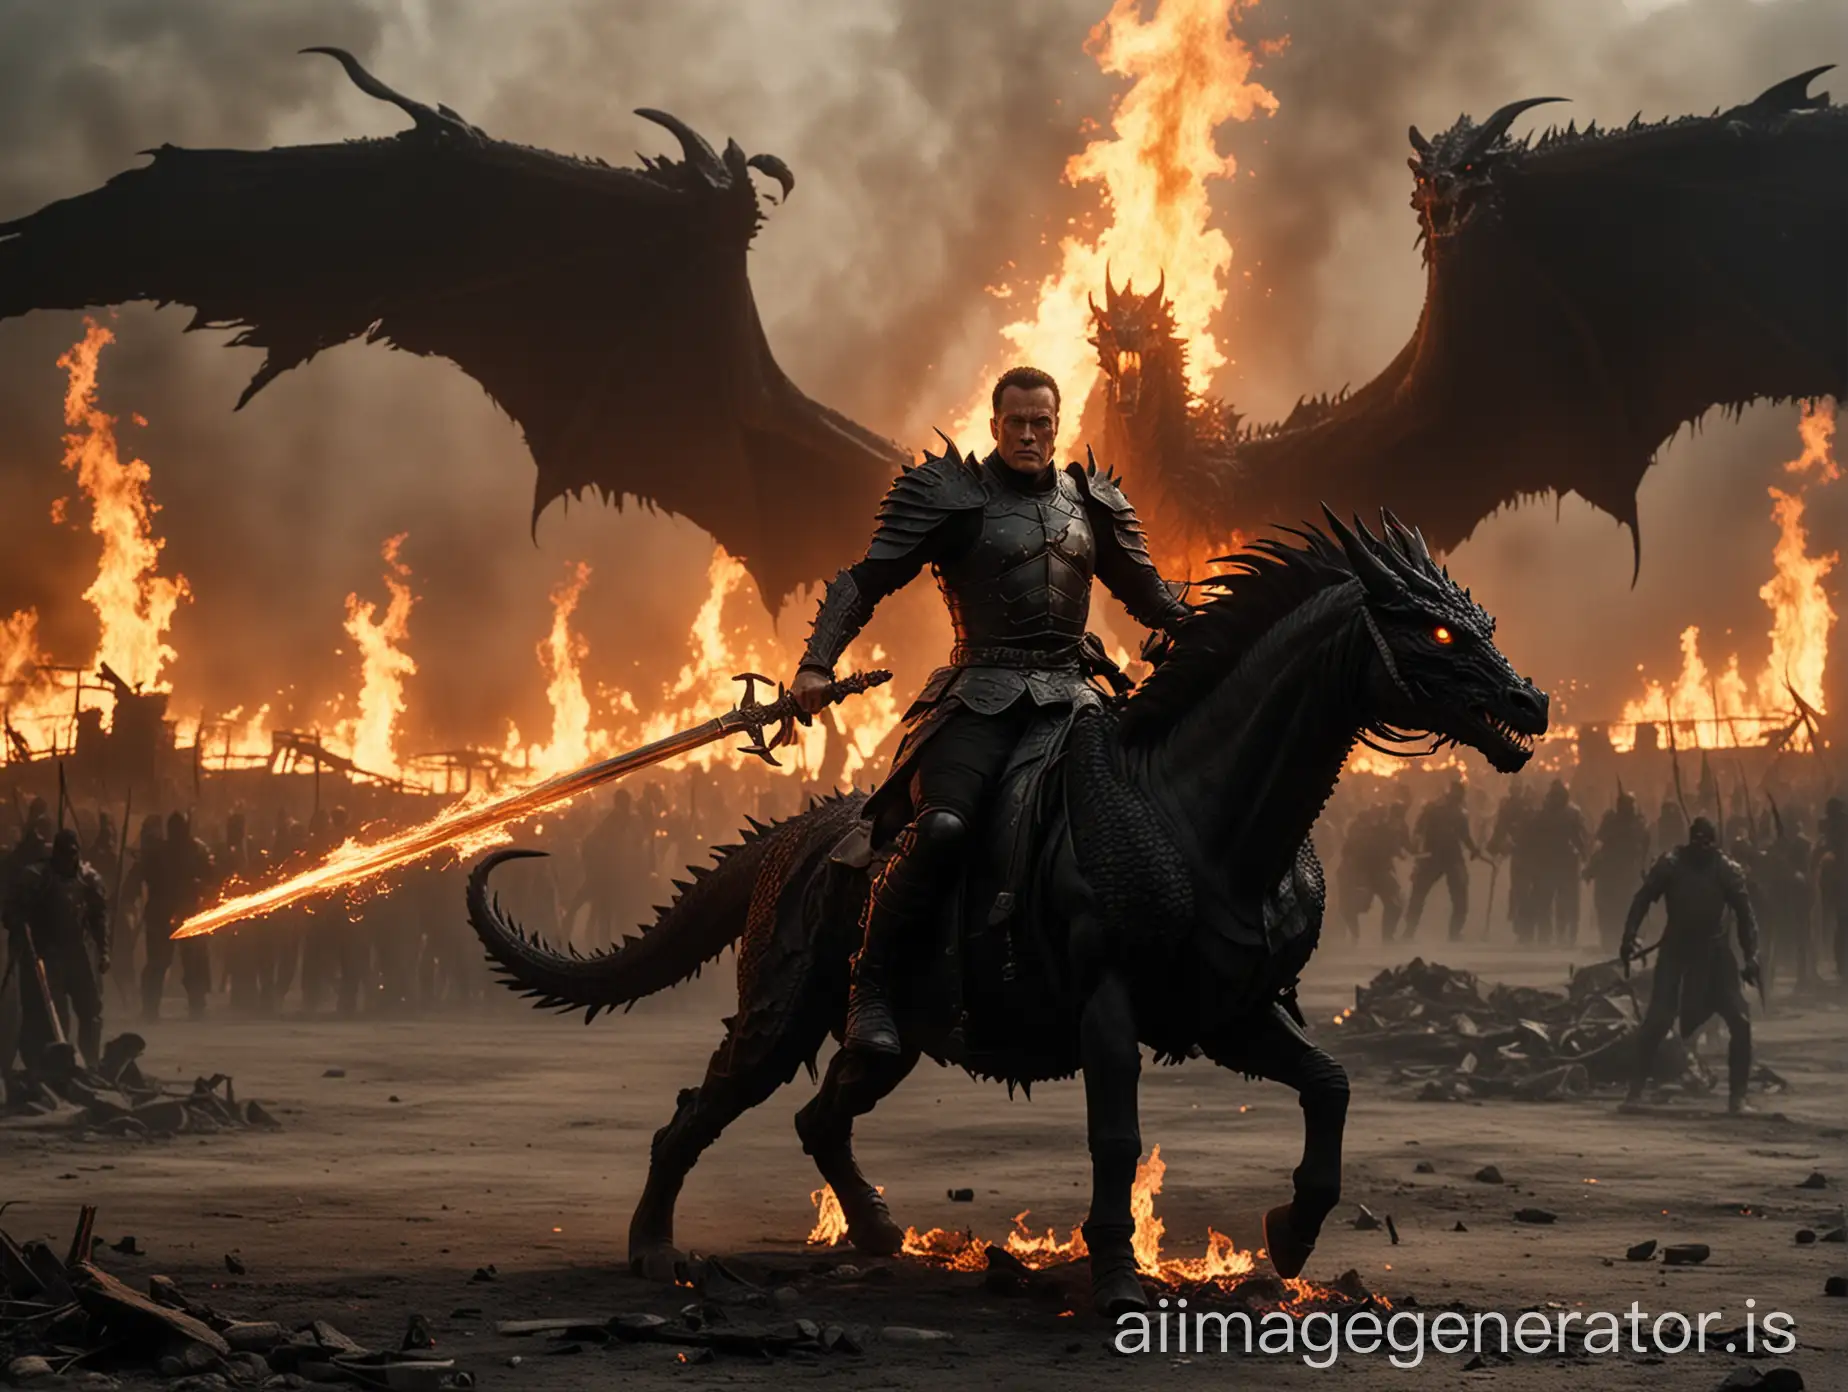 Jean-Claude Van Damme in black armor with a flaming sword, riding a black dragon. Wide shot in hell, fighting a demon